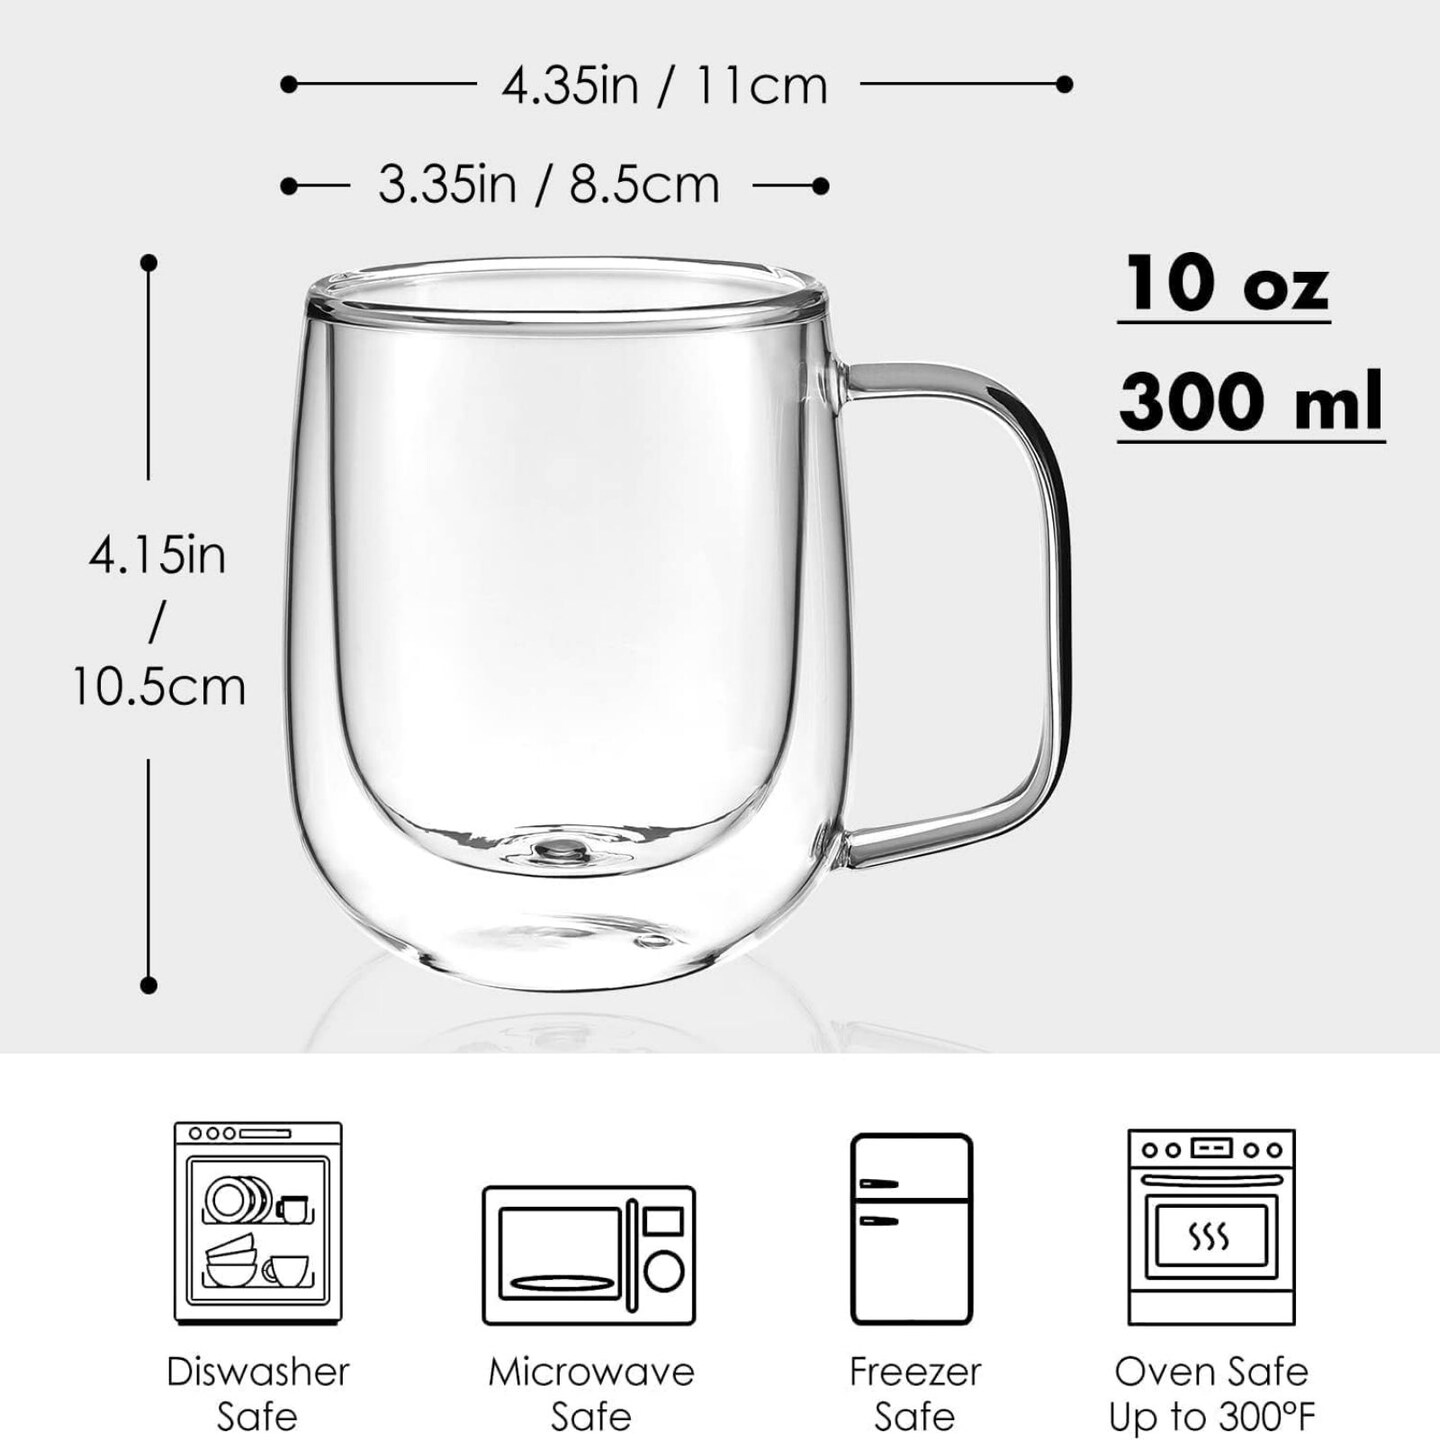 Double Walled Glass Coffee Mugs with Handle Insulated Glass Cappuccino Mugs